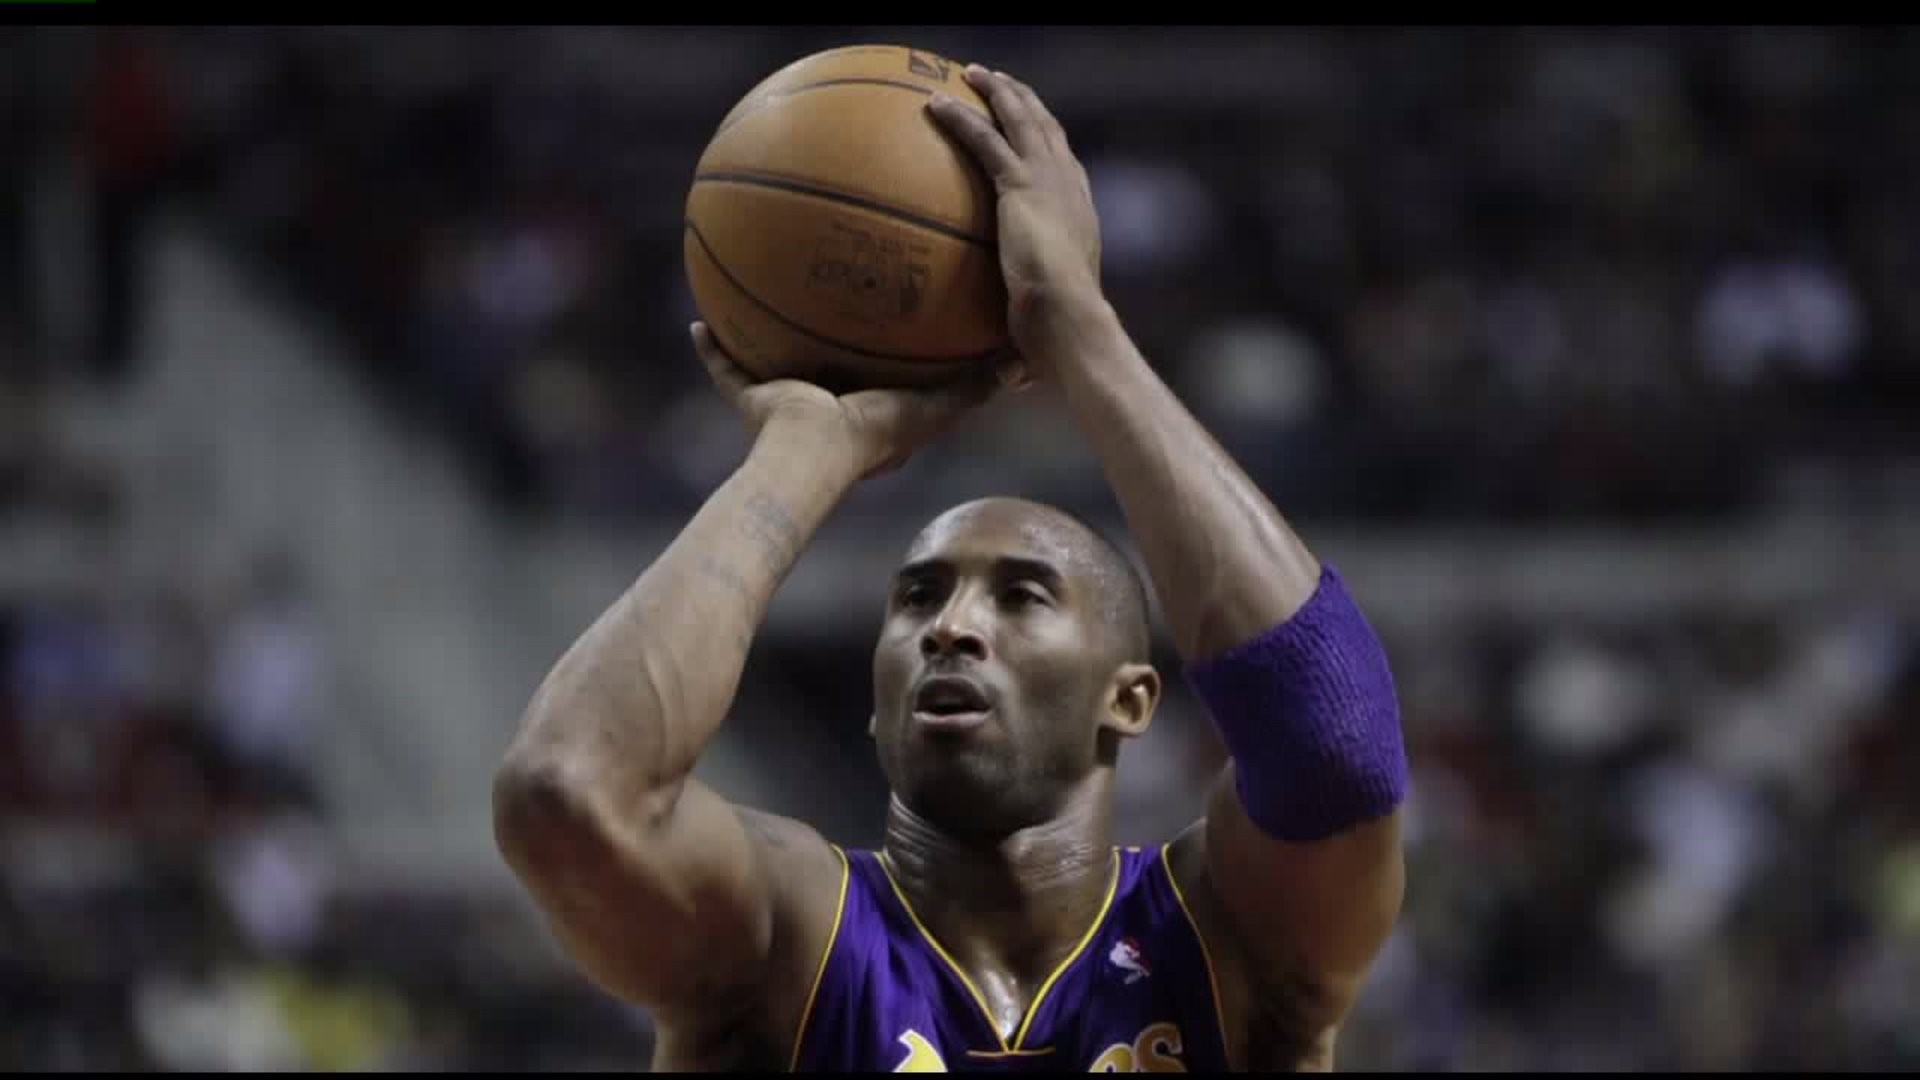 Kobe Bryant, his daughter, Gianna, and seven others killed in a helicopter crash in California